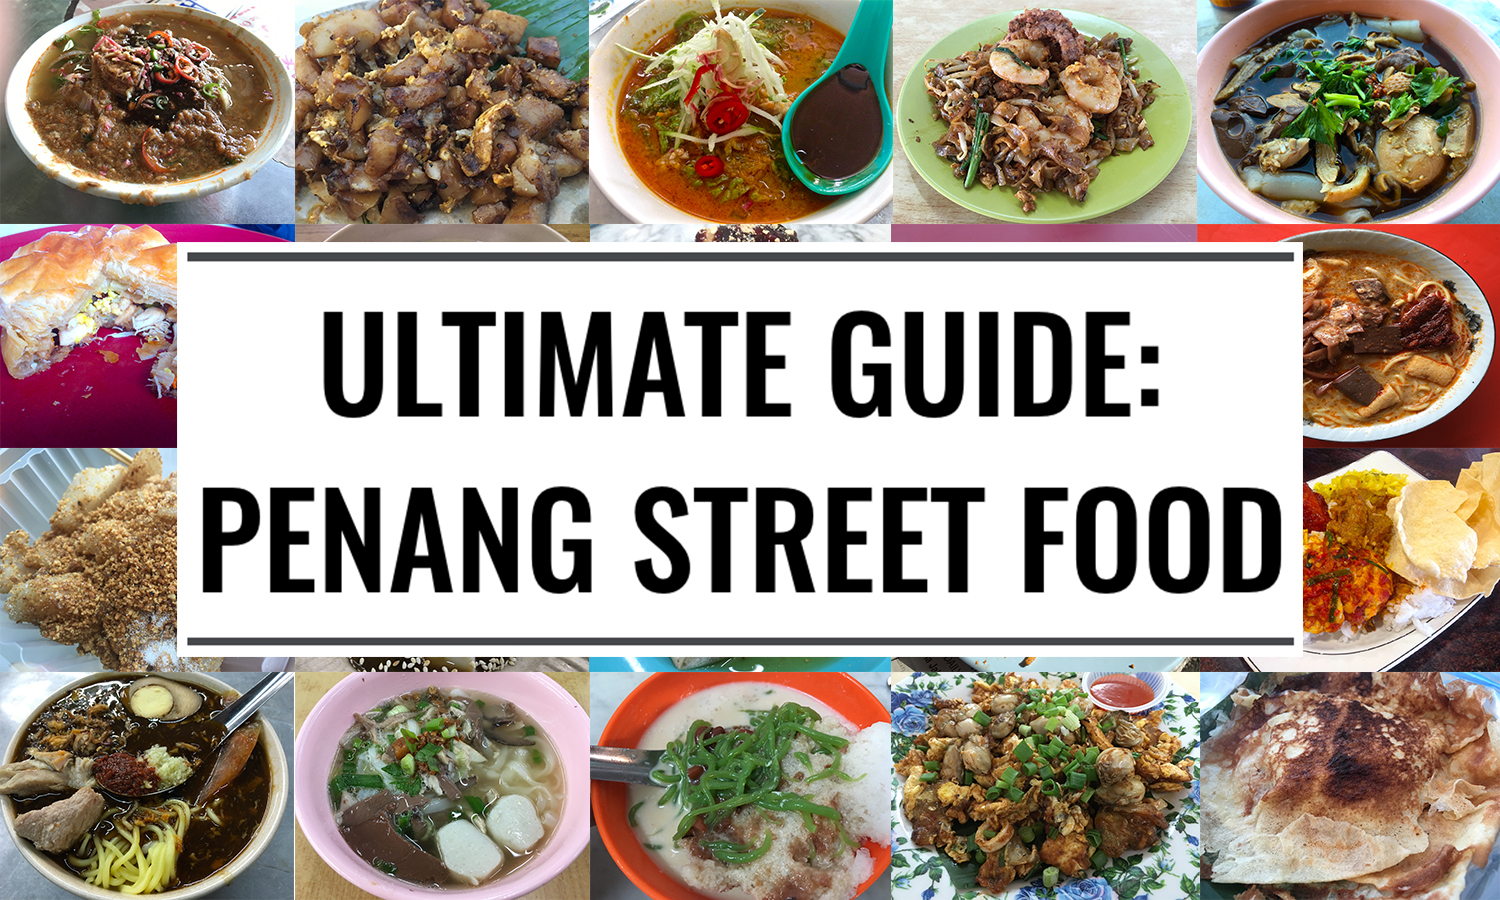 Ultimate Guide - Penang Street Food | Food For Thought